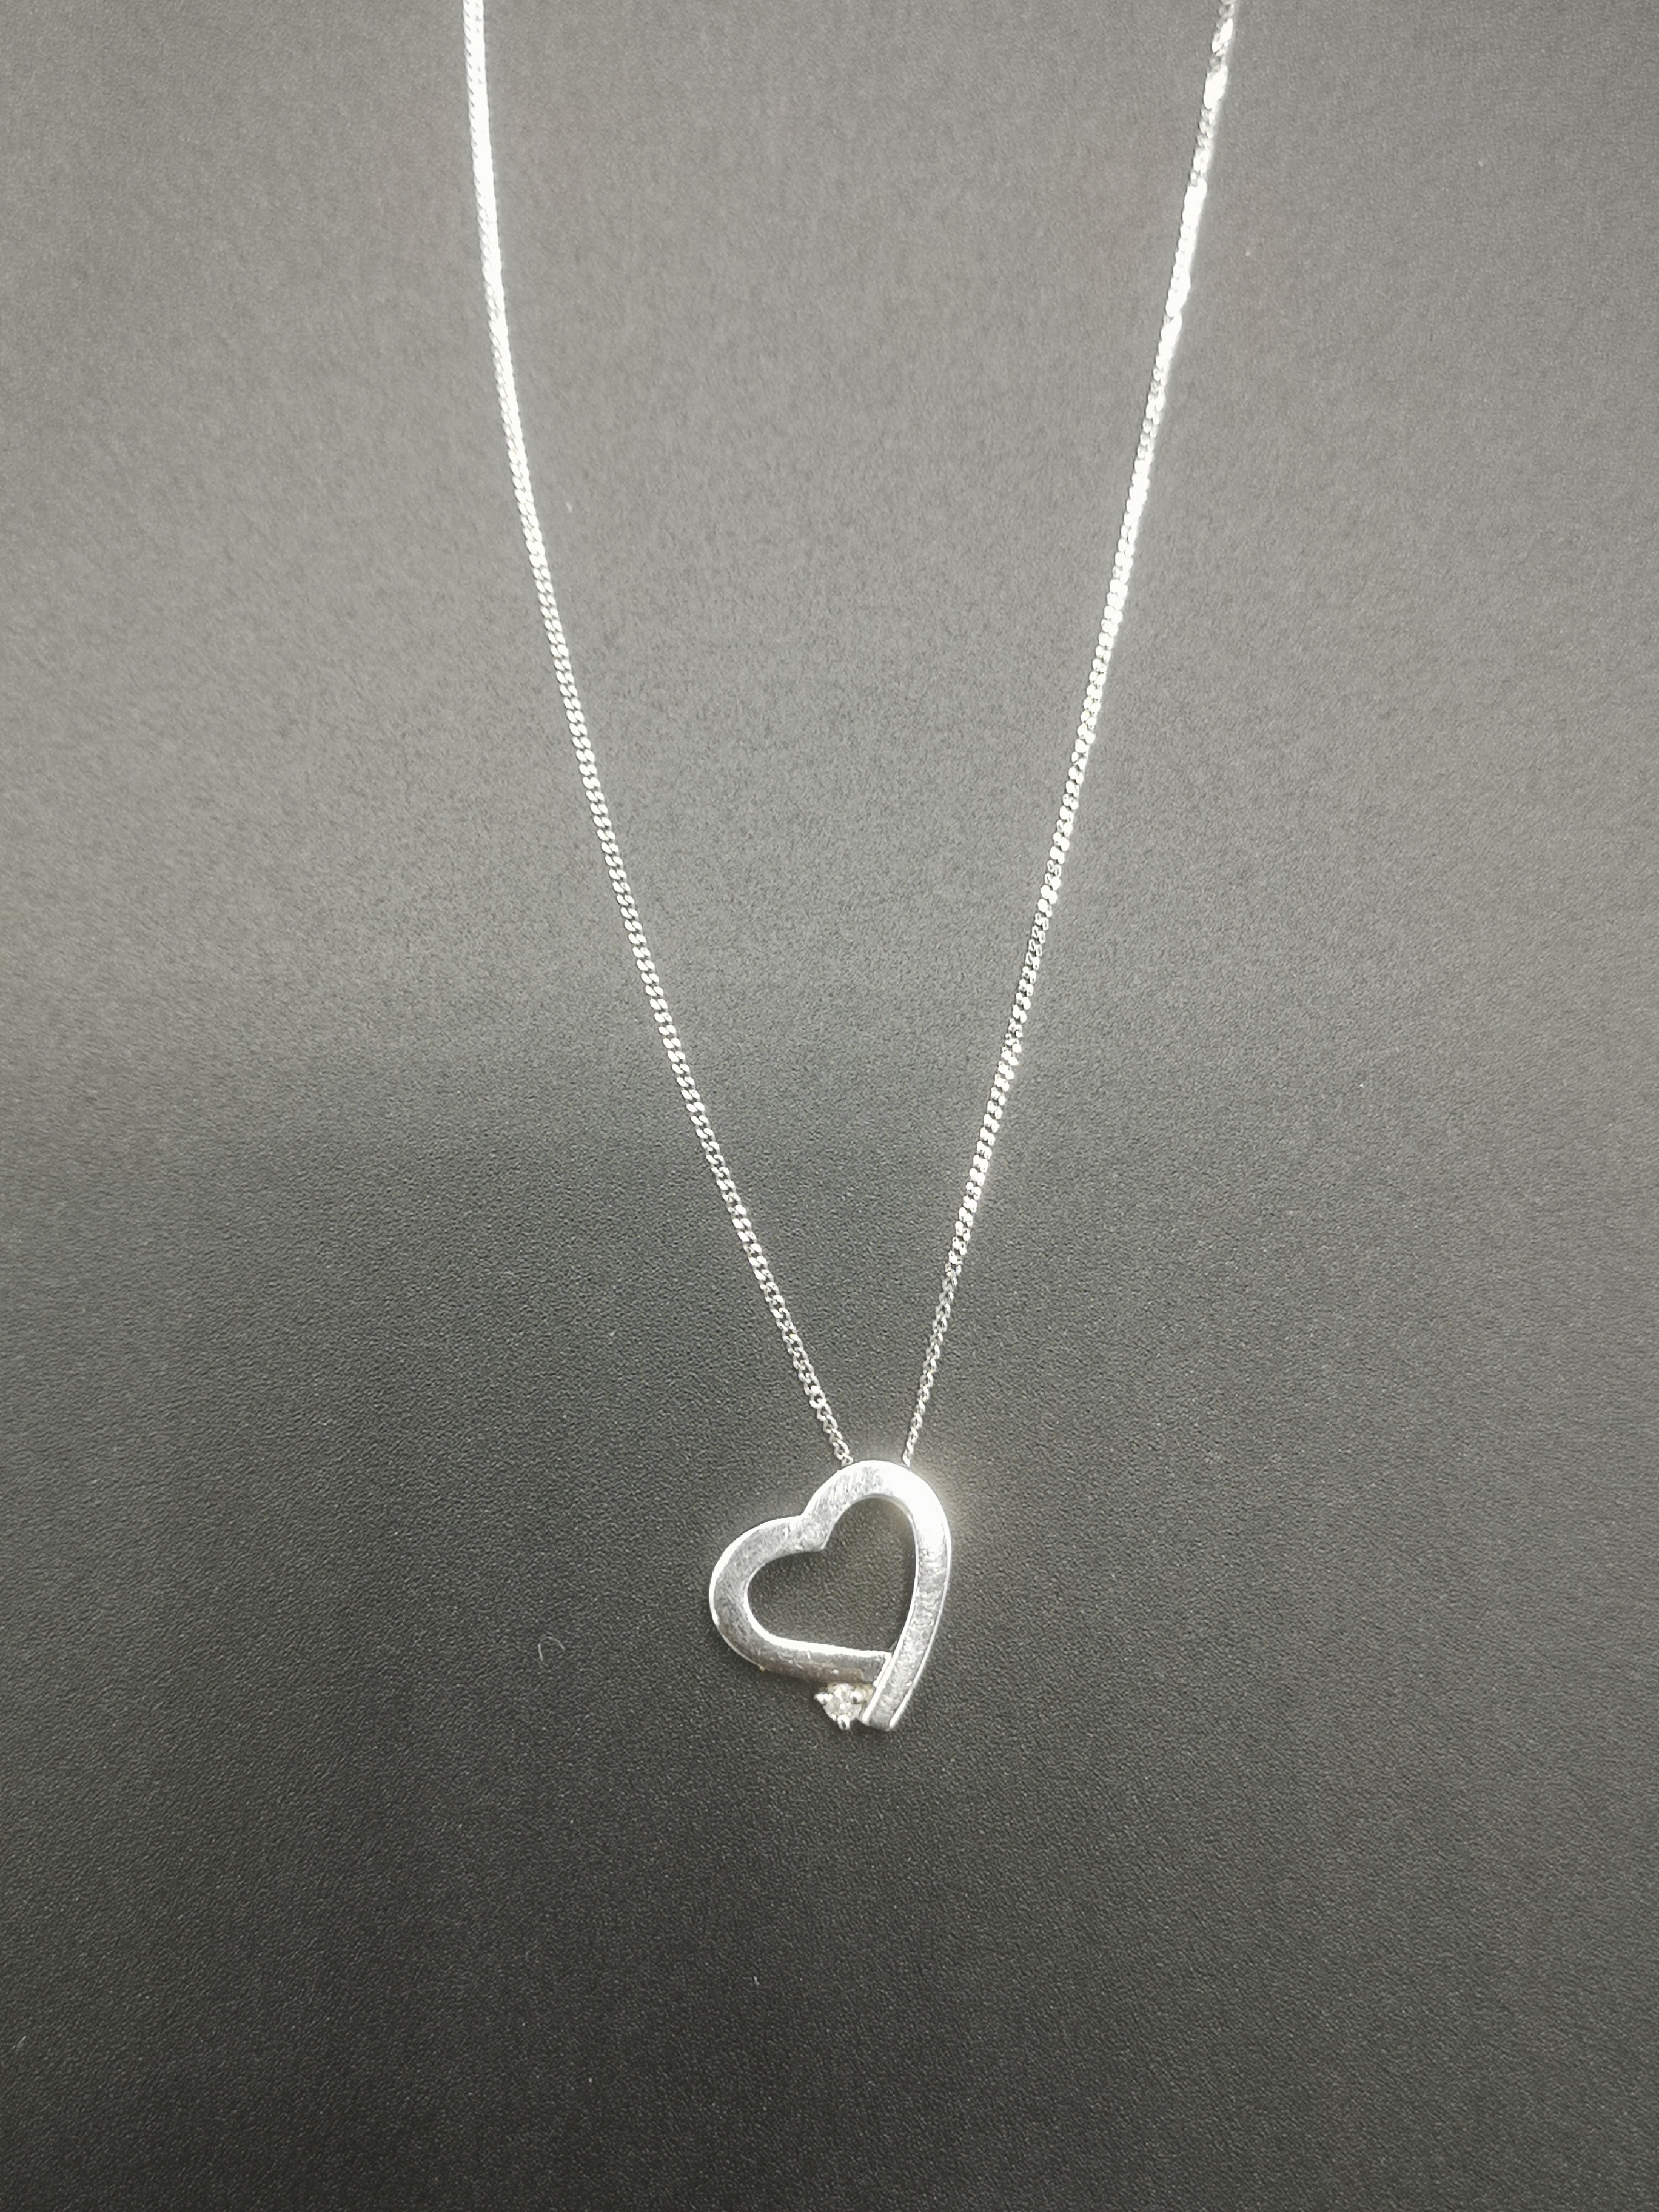 9ct white gold chain and pendant - Image 6 of 6